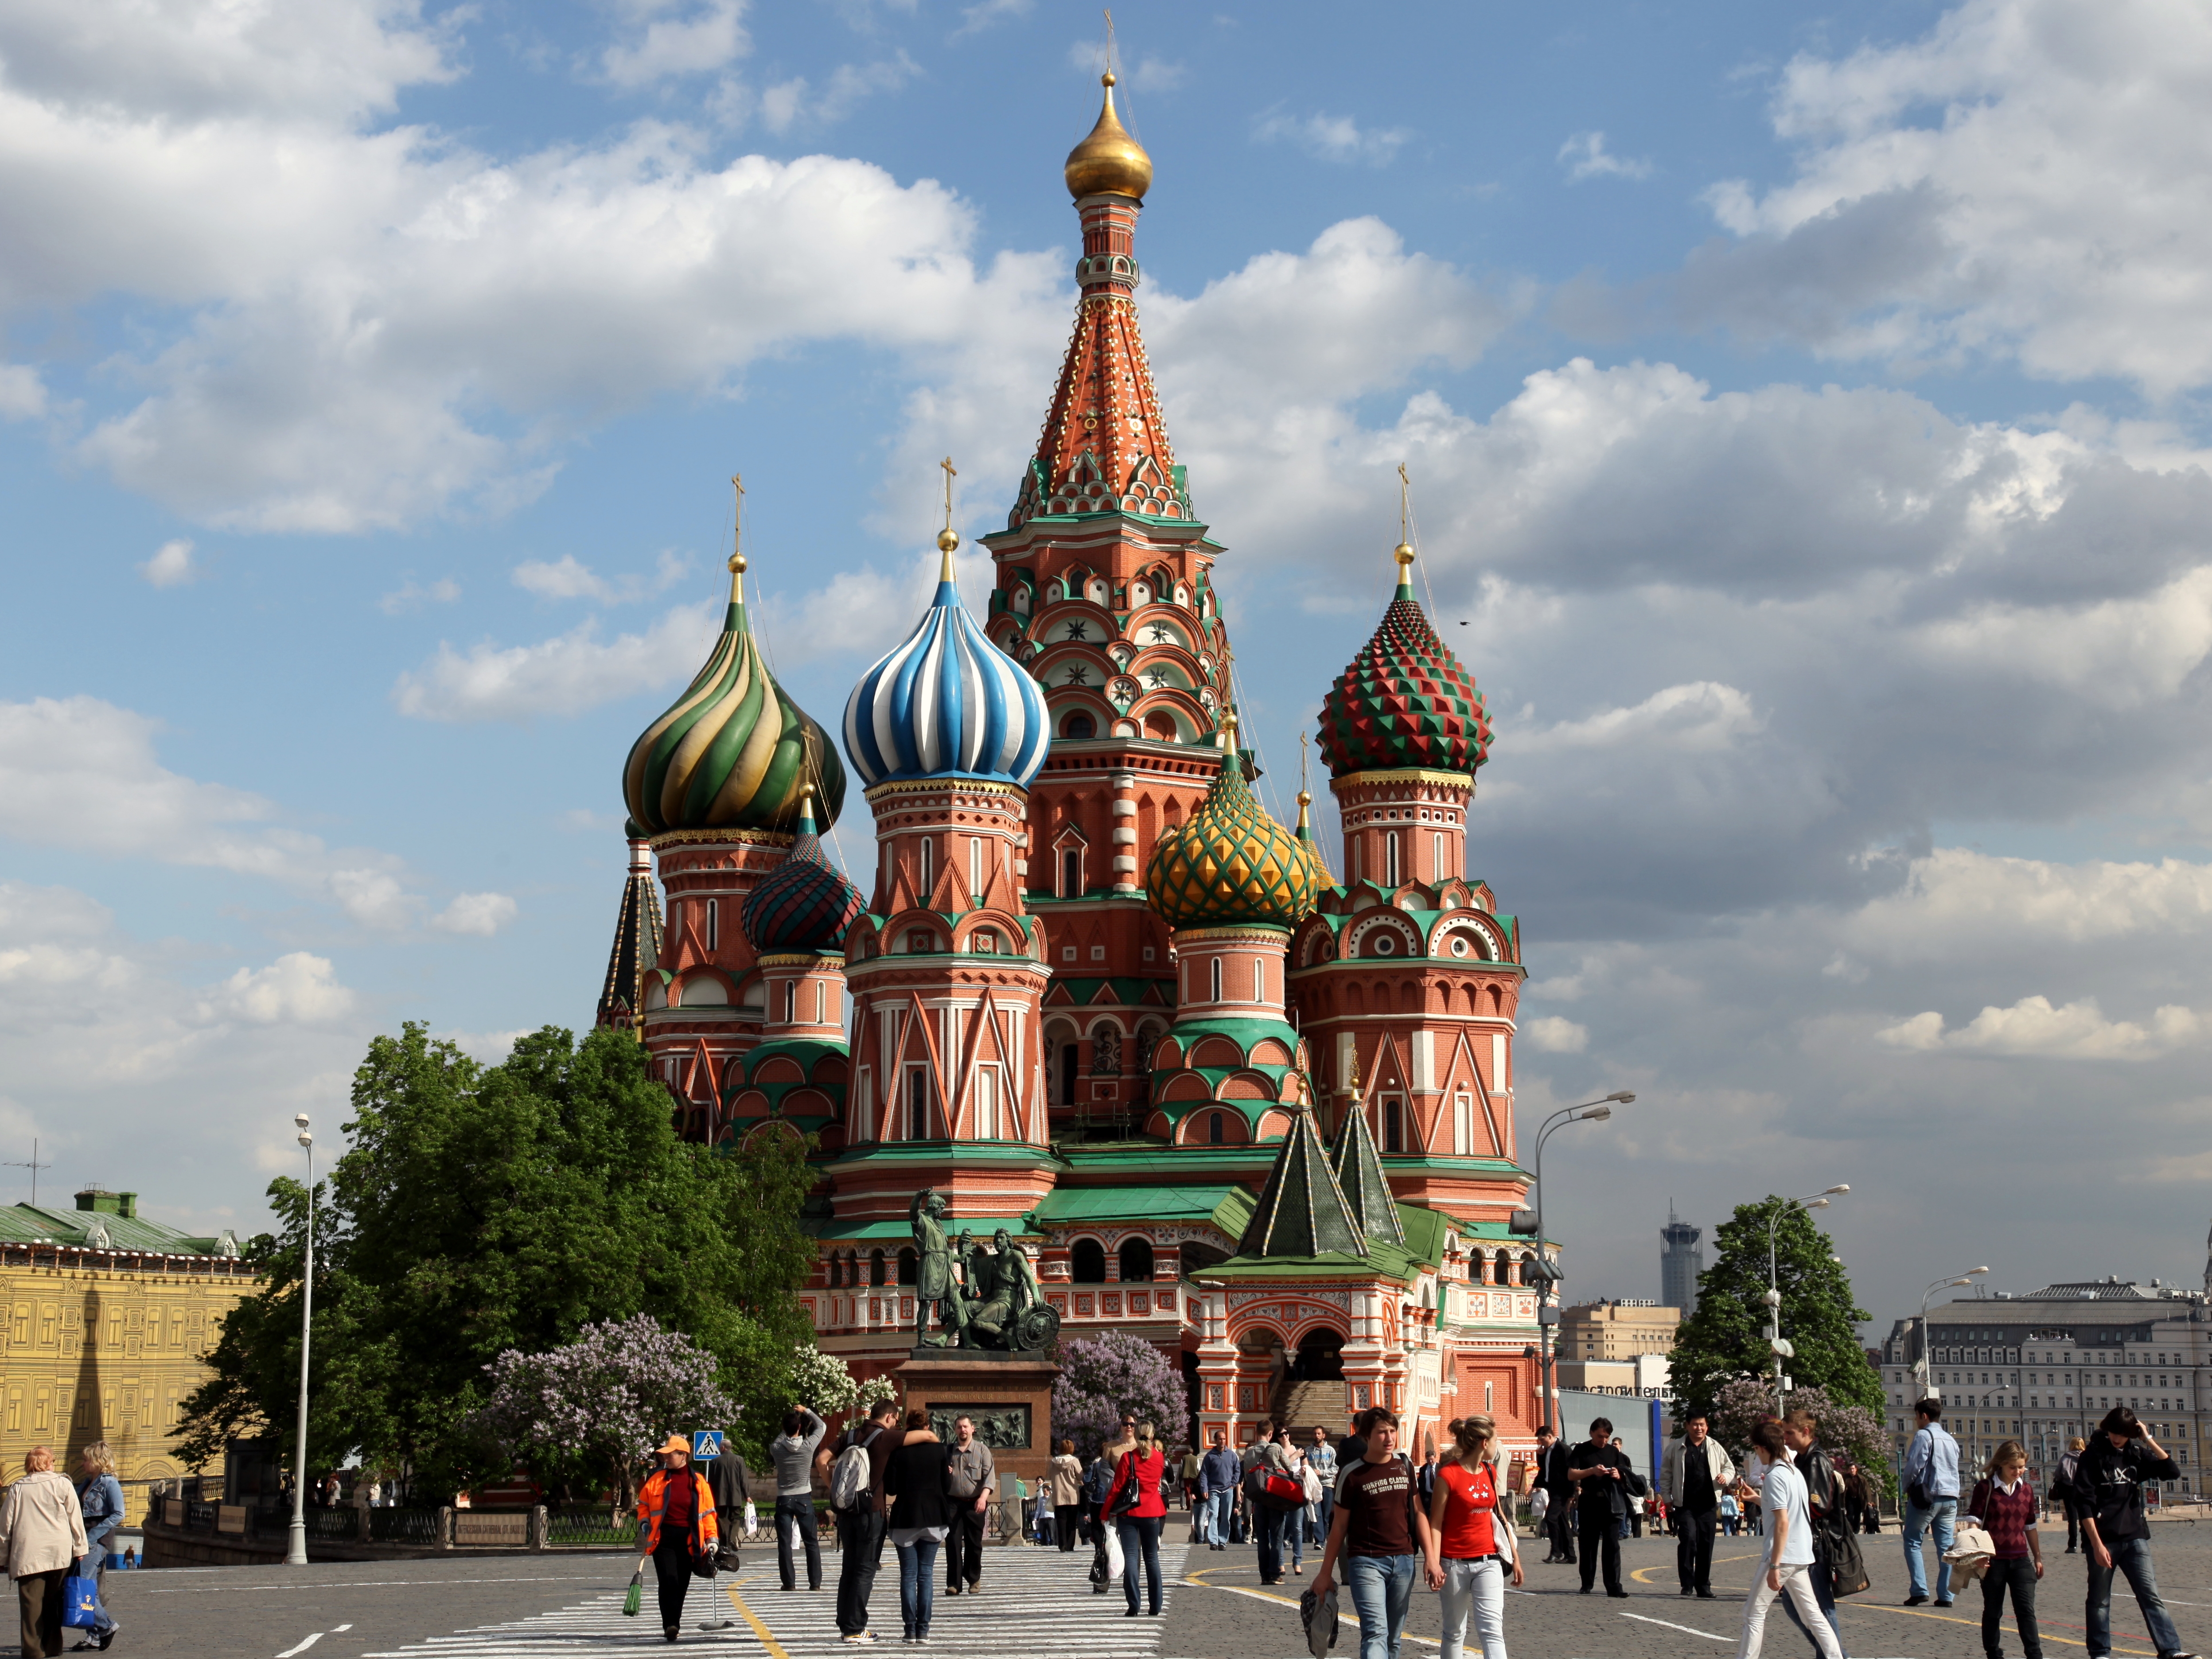 saint basil's cathedral, religious, cathedrals